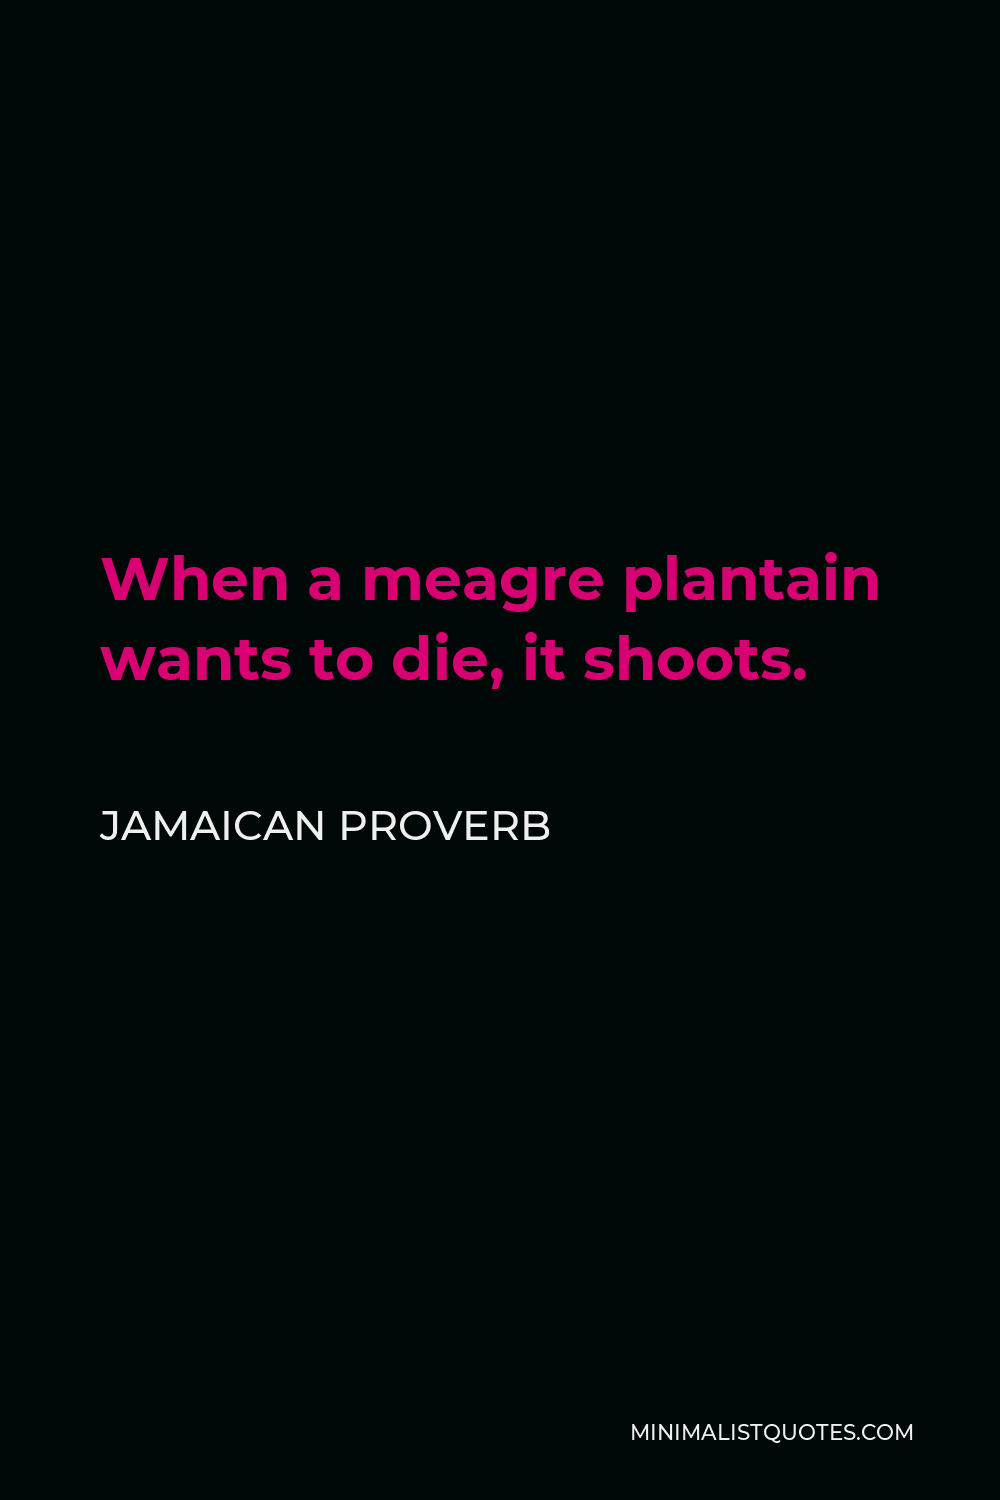 Jamaican Proverb Quote - When a meagre plantain wants to die, it shoots.